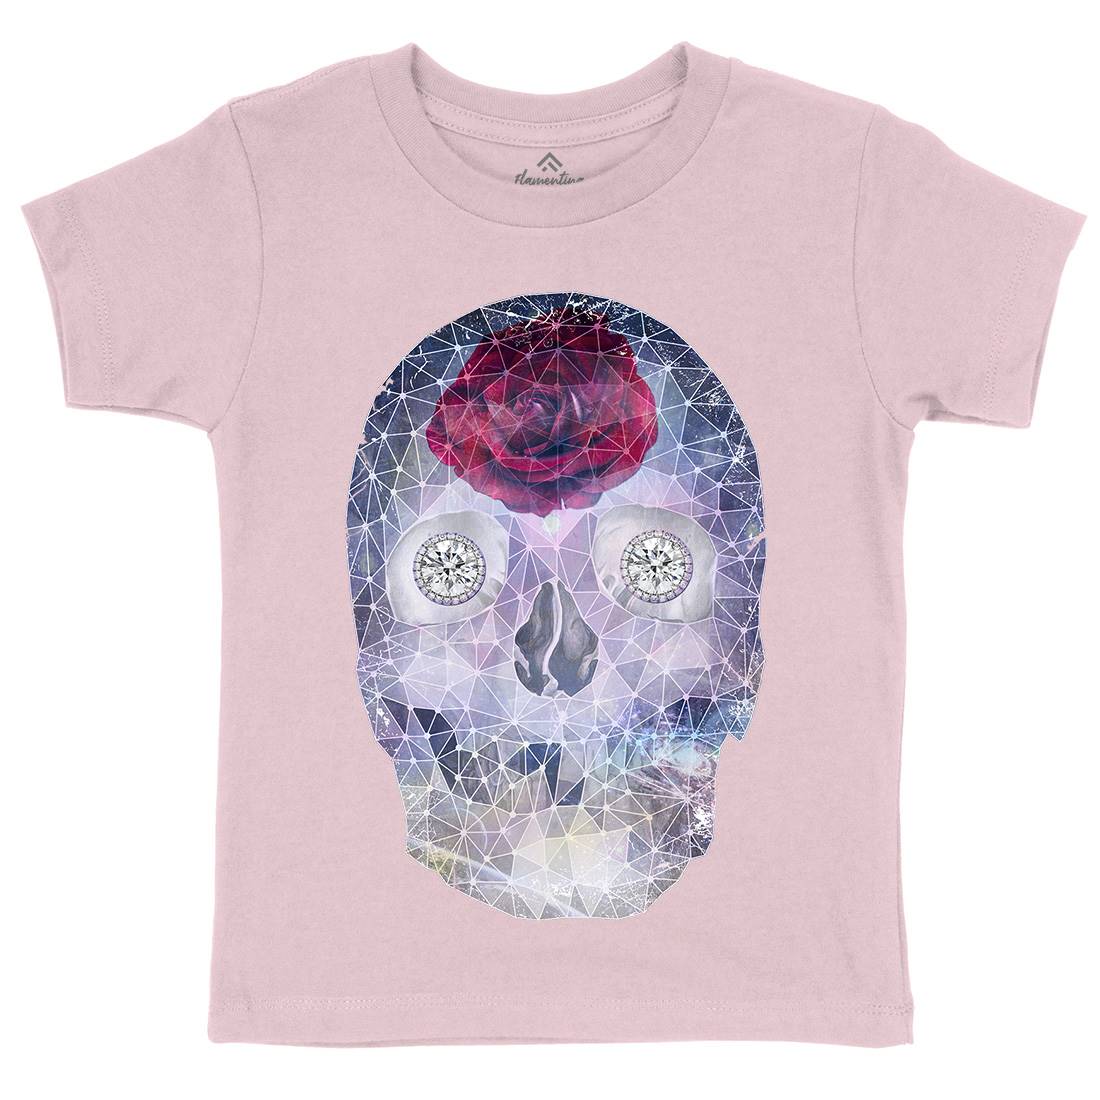 Crystal Skull Kids Crew Neck T-Shirt Space A816